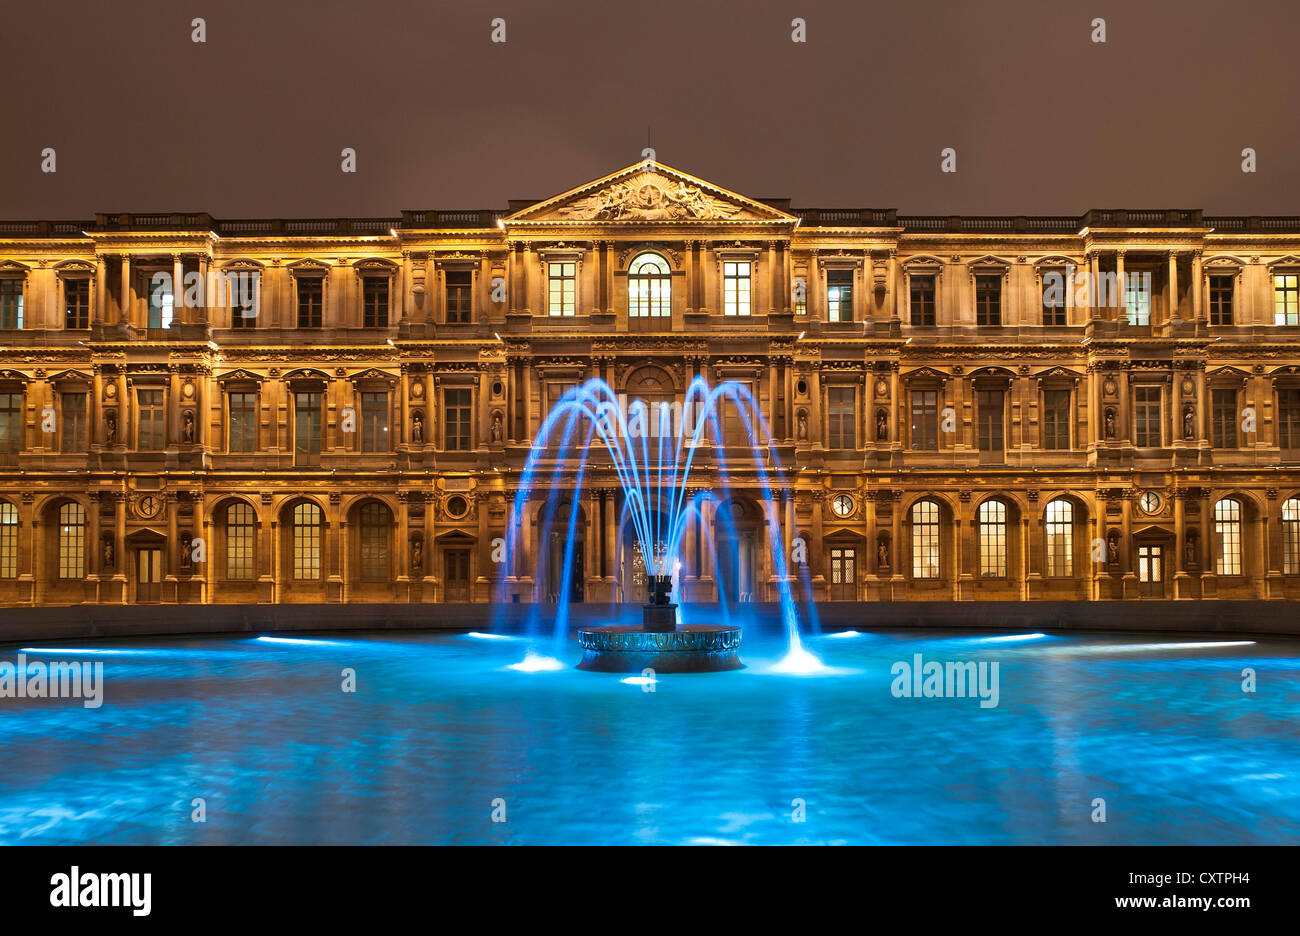 The Louvre museum at night, Paris, France Stock Photo